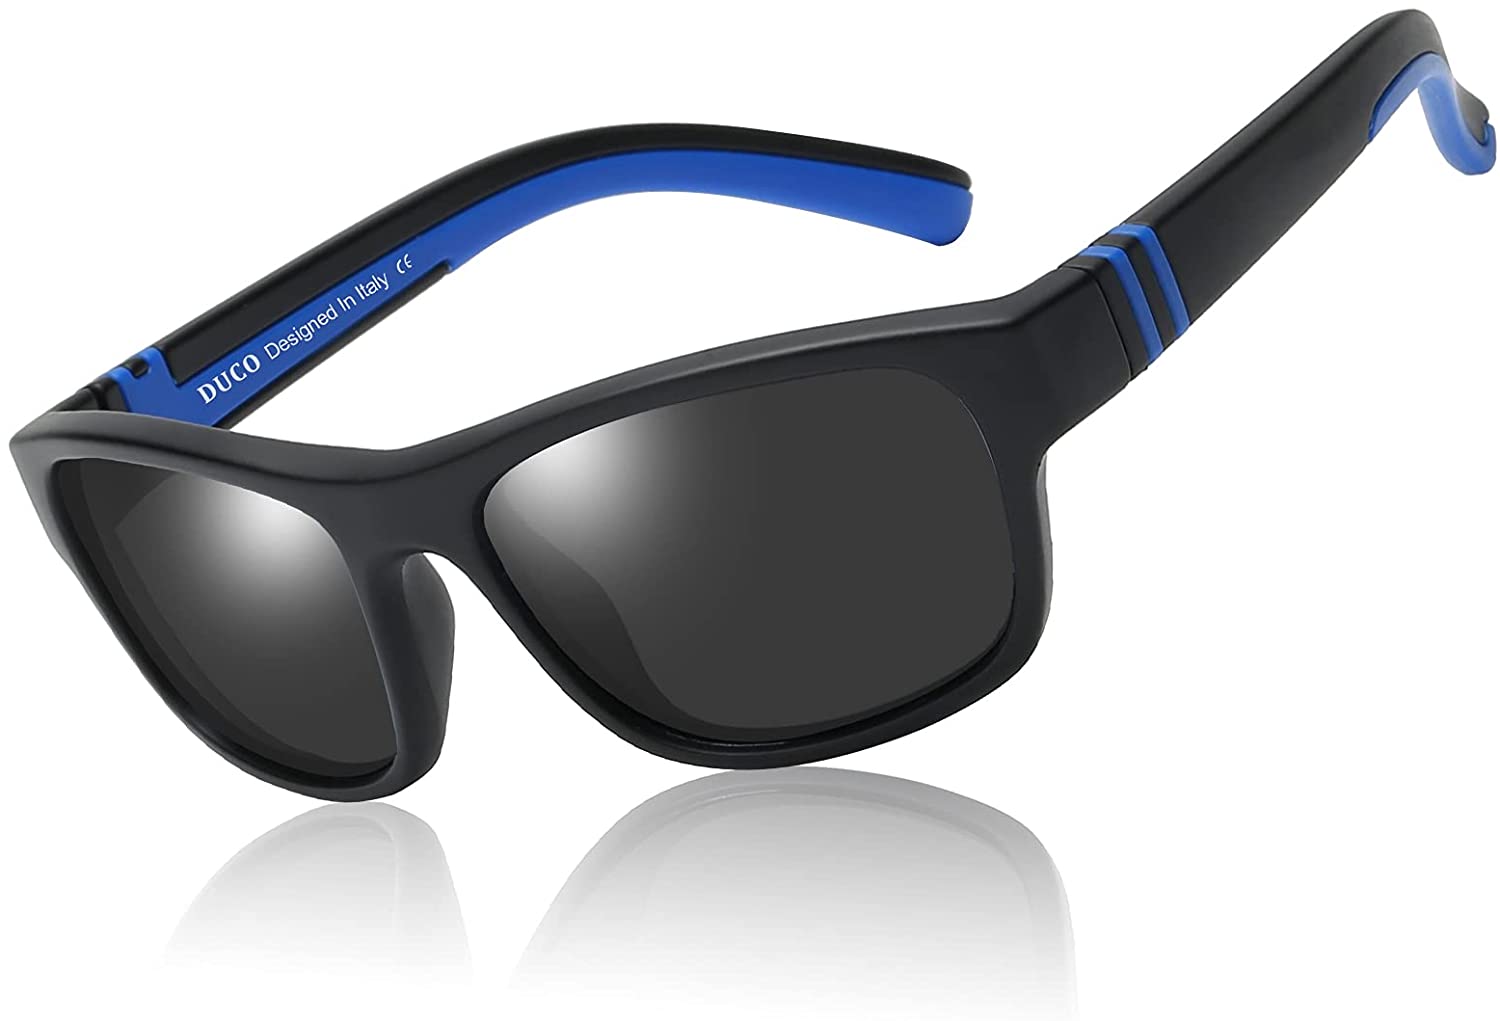 Sunnies™: Polarized Sunglasses for Kids with 100% UVA/UVB Protection